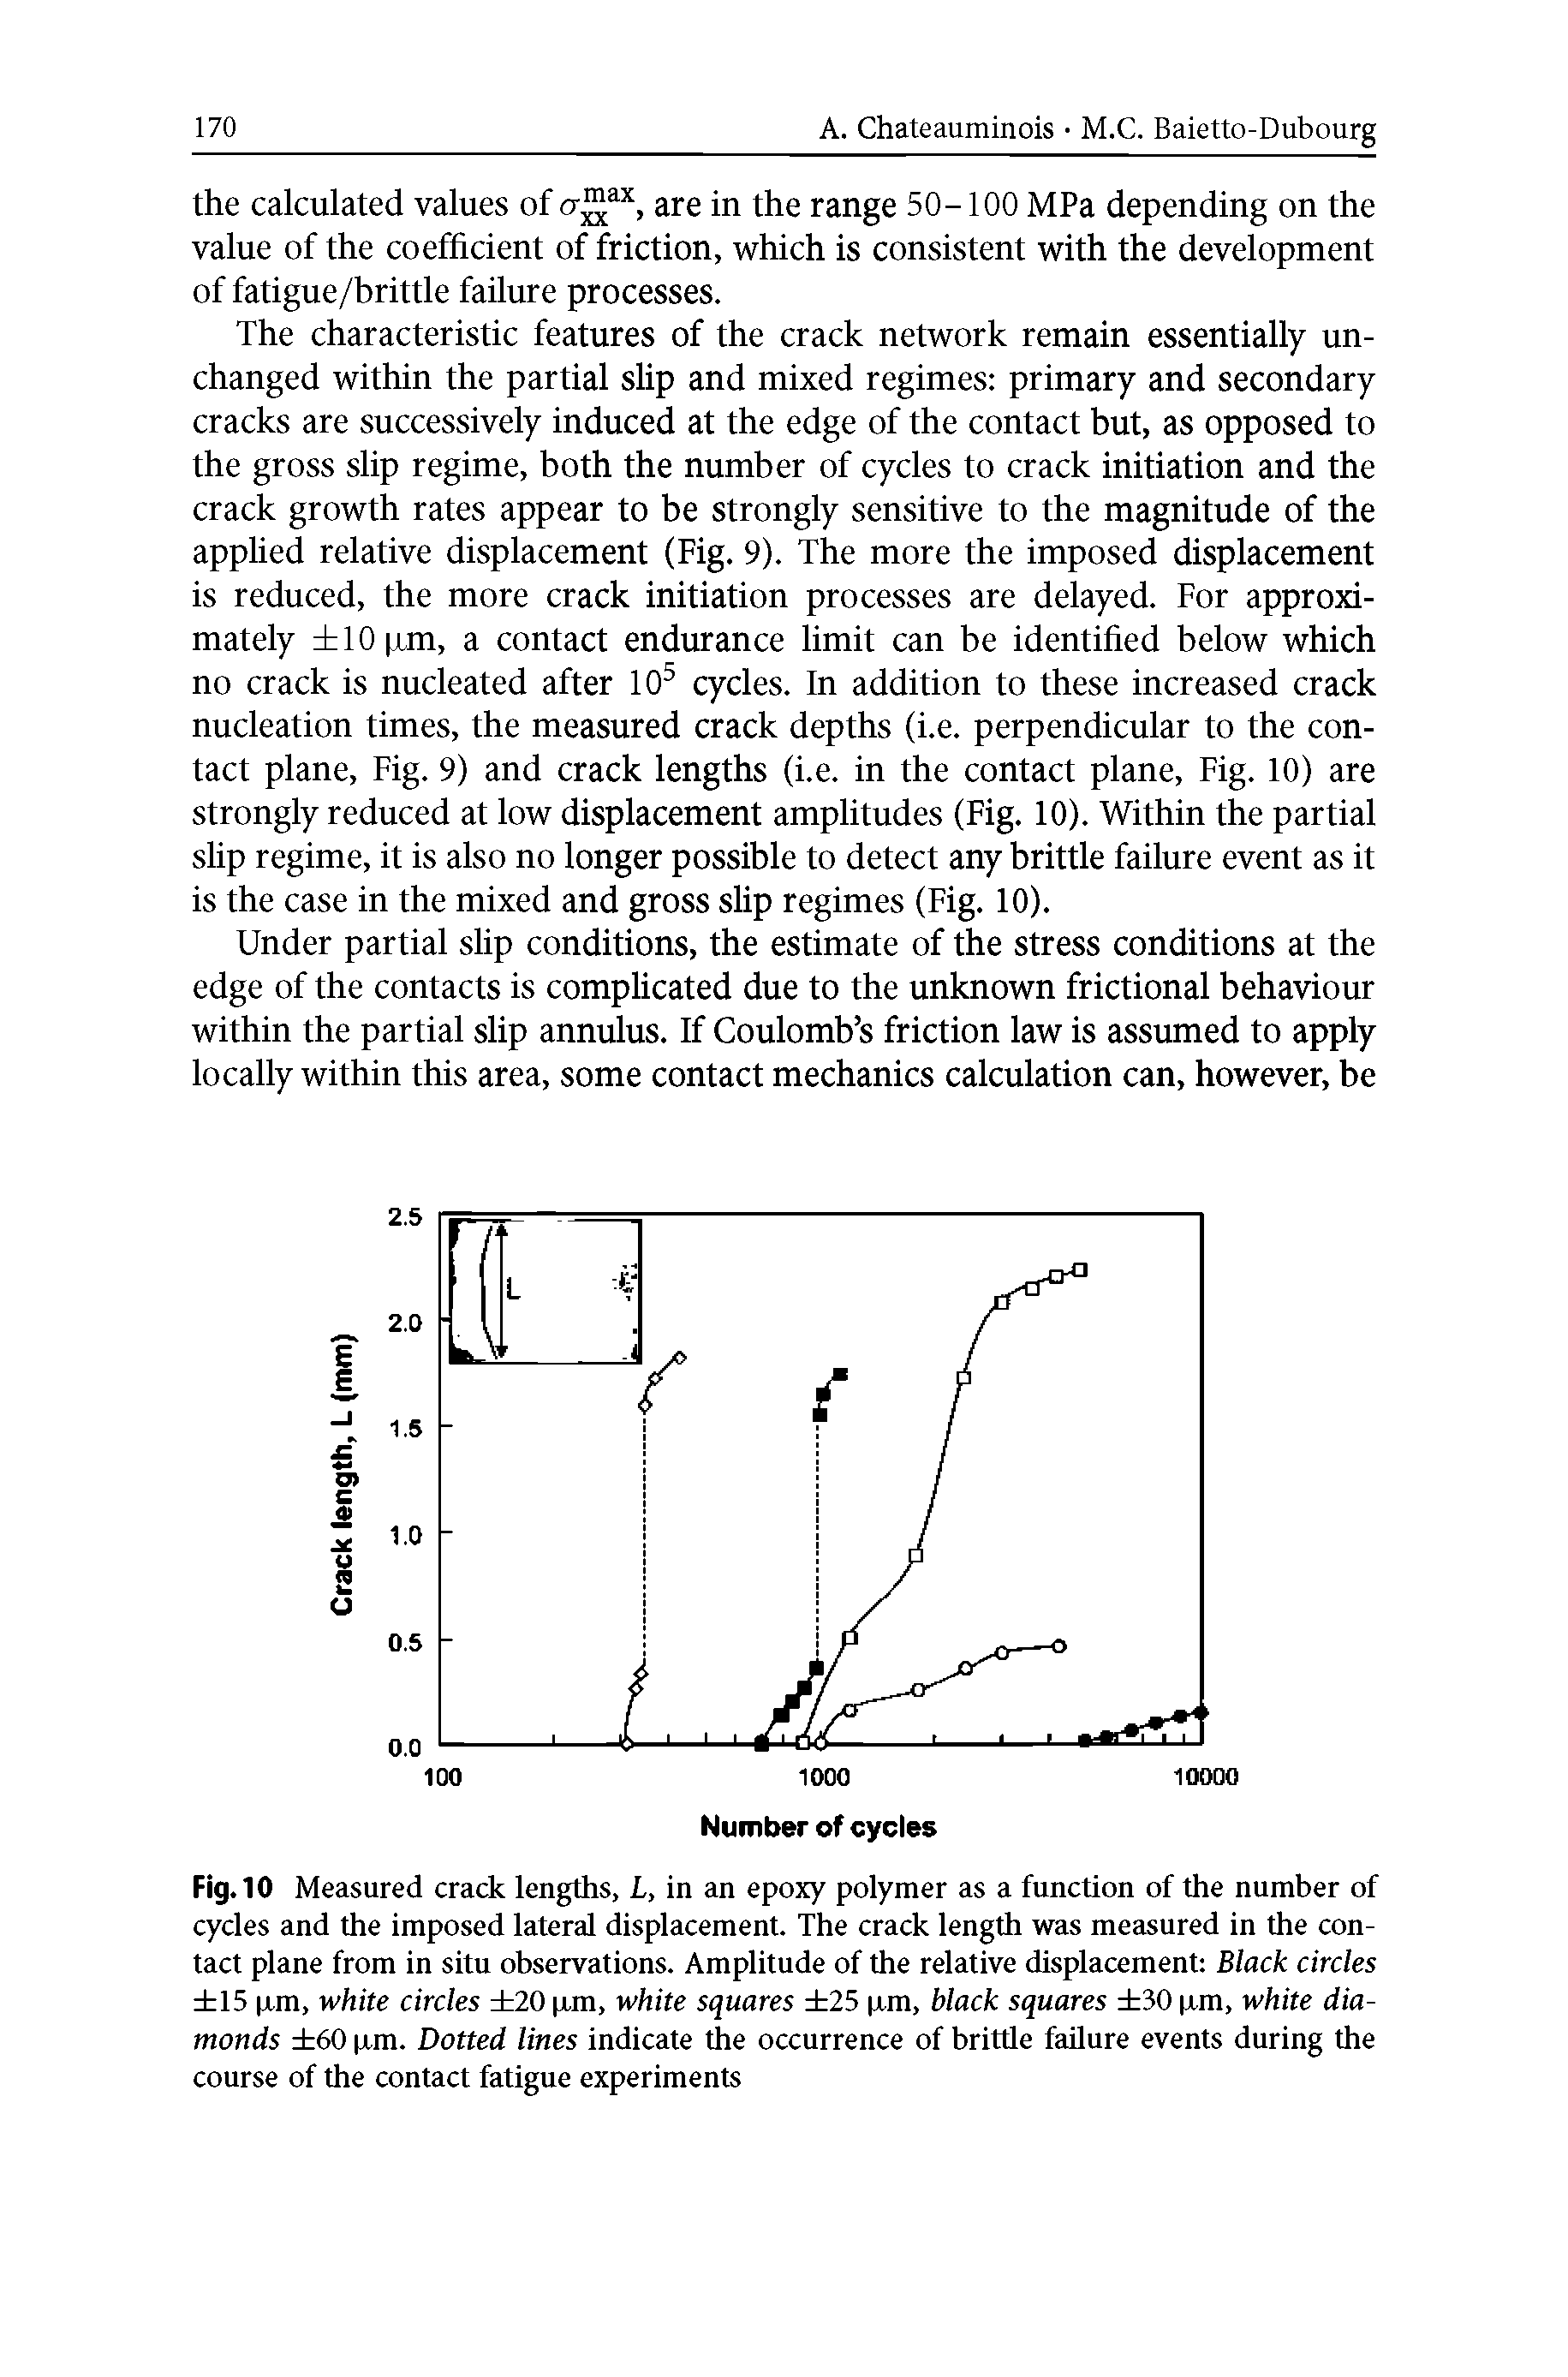 Fig. 10 Measured crack lengths, L, in an epoxy polymer as a function of the number of cycles and the imposed lateral displacement. The crack length was measured in the contact plane from in situ observations. Amplitude of the relative displacement Black circles 15 xm, white circles 20 pm, white squares 25 pm, black squares 30 pm, white diamonds 60 pm. Dotted lines indicate the occurrence of britde failure events during the course of the contact fatigue experiments...